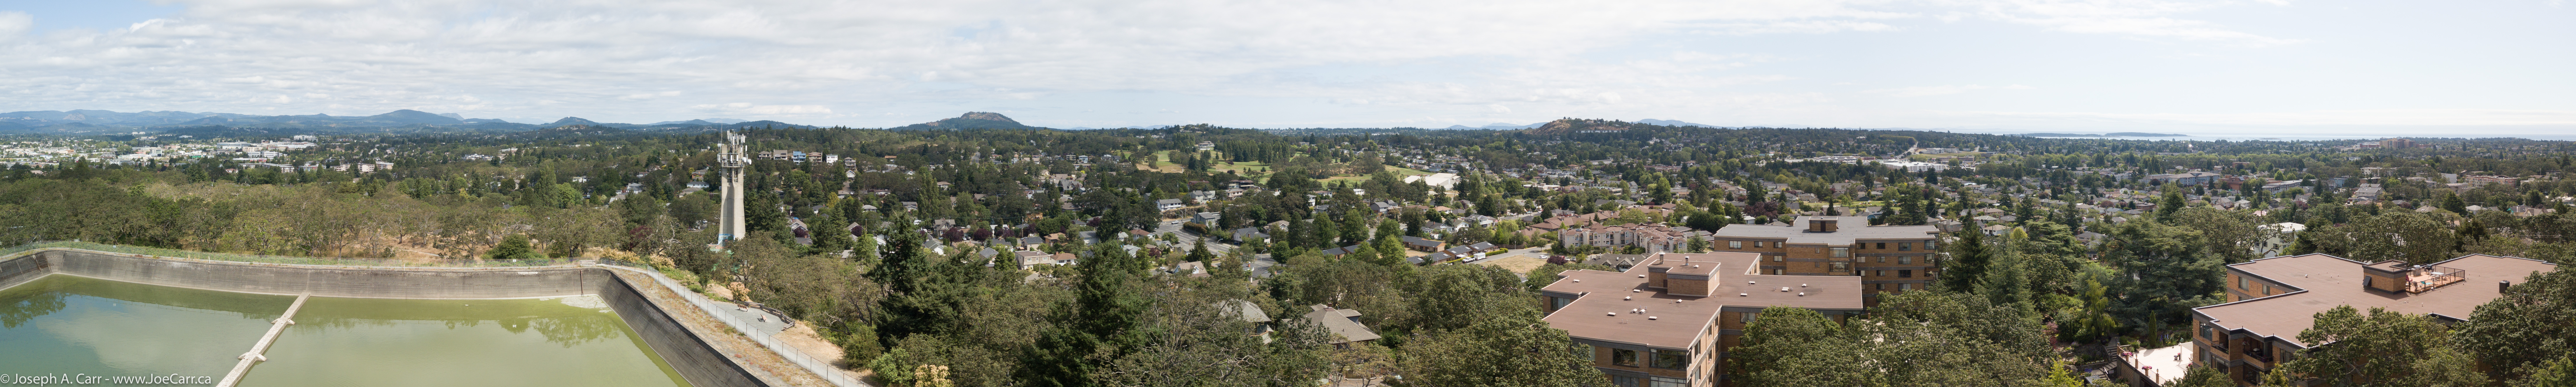 Aerial panorama from the Smith Hill reservoir by Summit Park - July 3, 2017